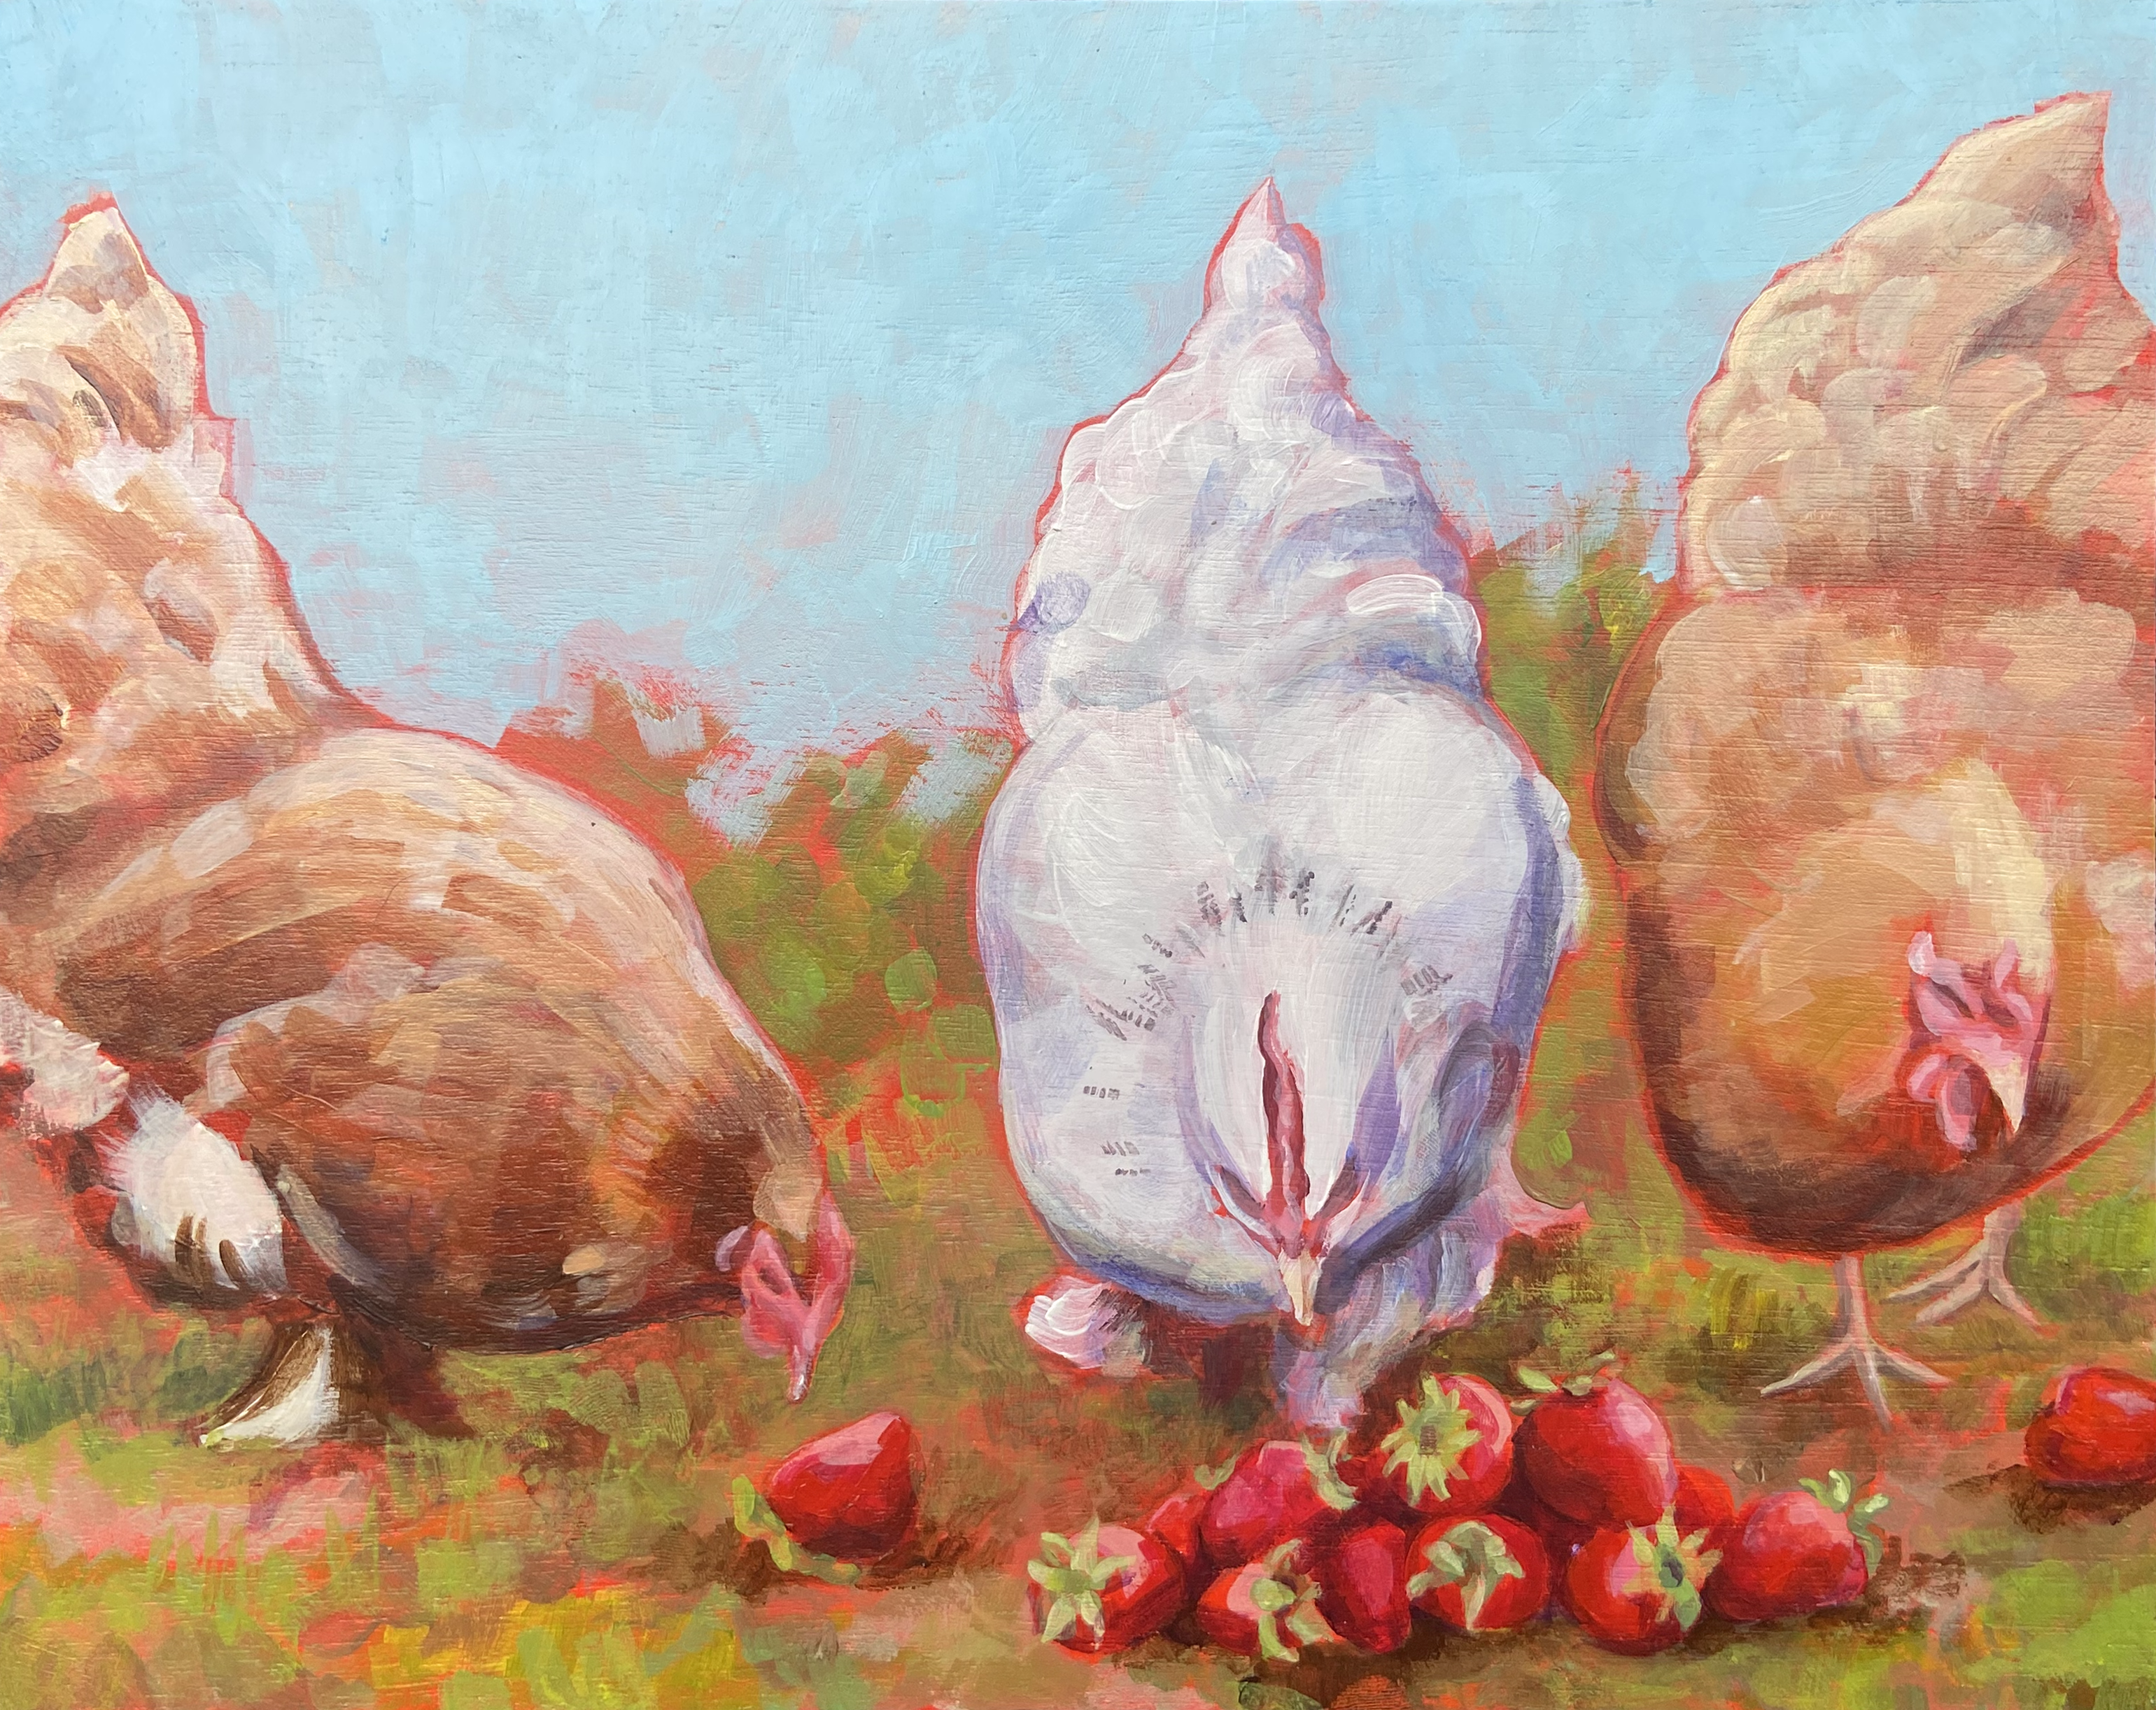 A painterly piece of artwork titled Strawberry Hens. Shown are three hens, two red flanking one white, all examining a pile of ripe strawberries. The painting has a warm, pinkish feel.